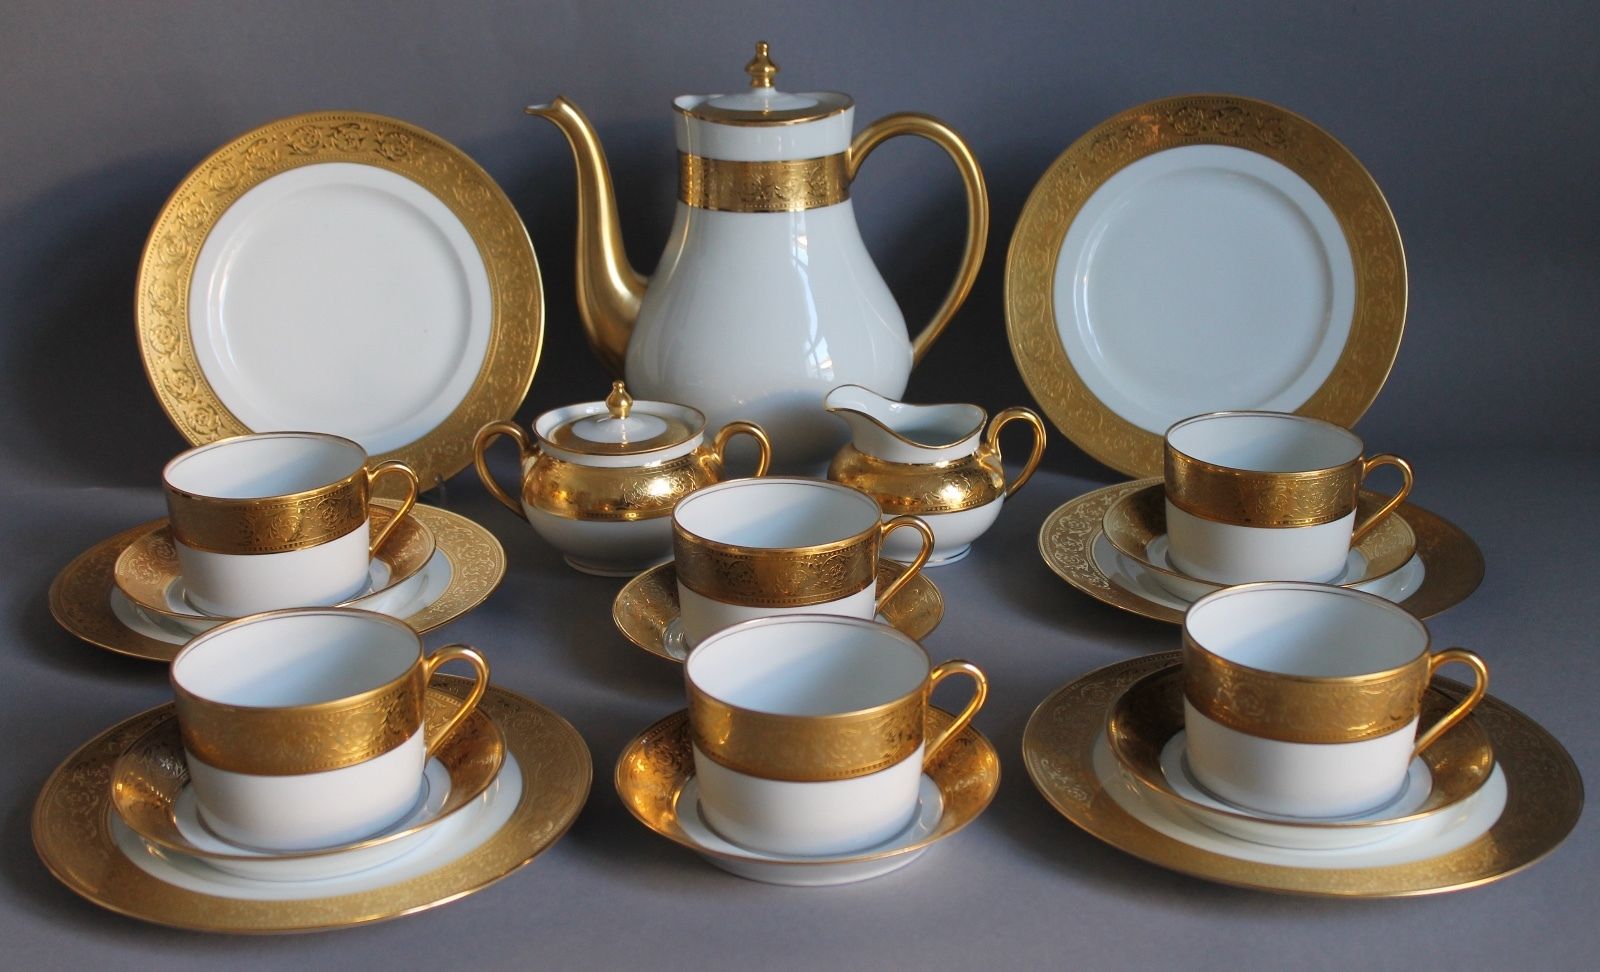 21 pc Thistle Gold Haviland Limoges France Coffee Service Set for 6